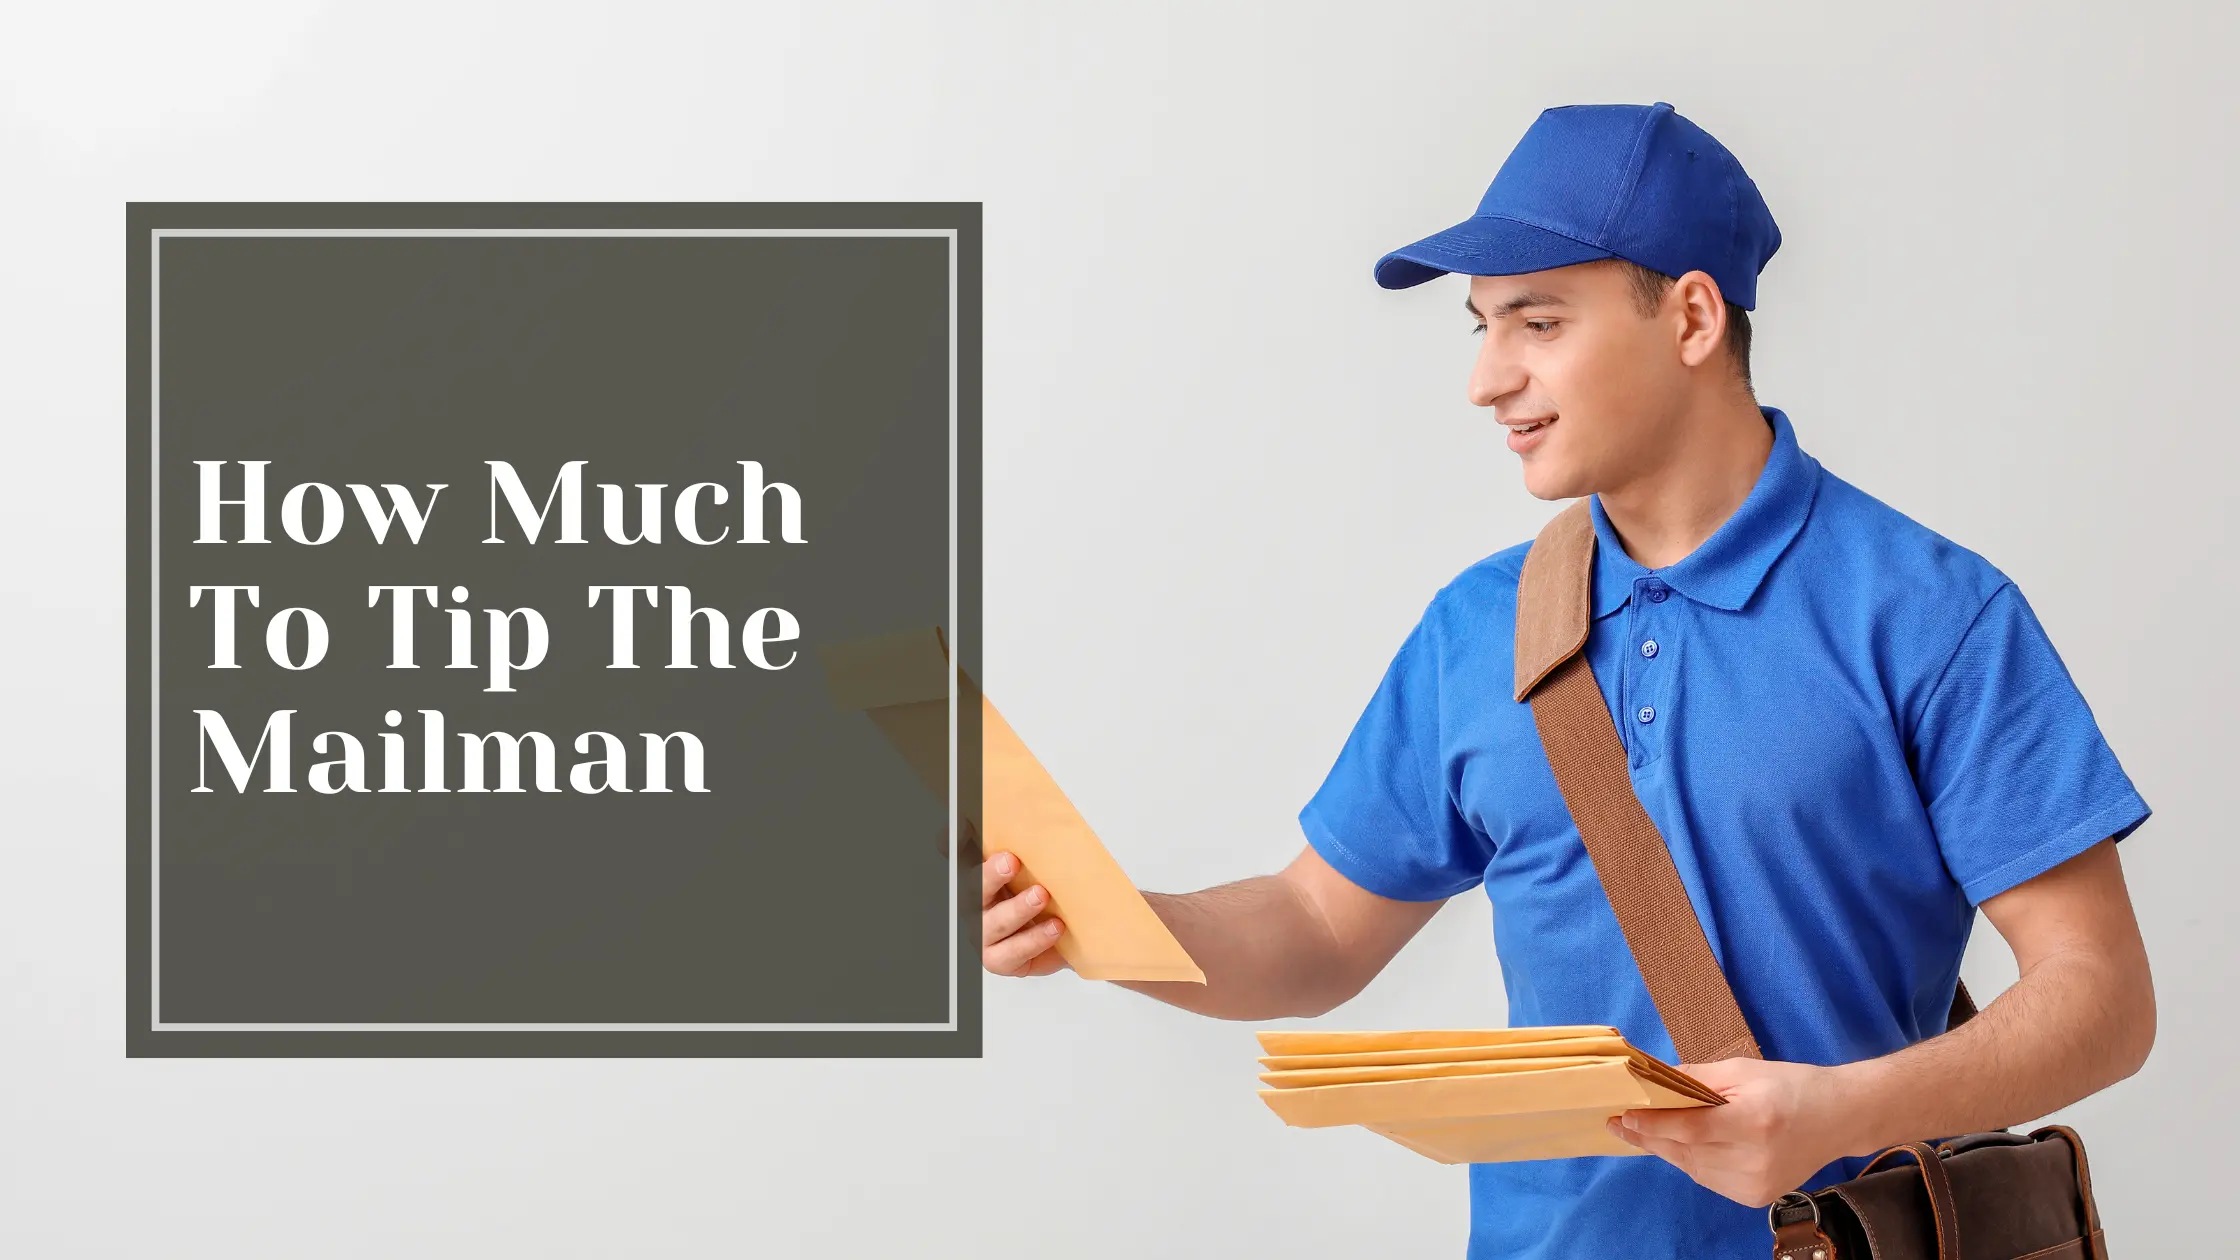 How Much To Tip The Mailman - The Talking Tradesmen